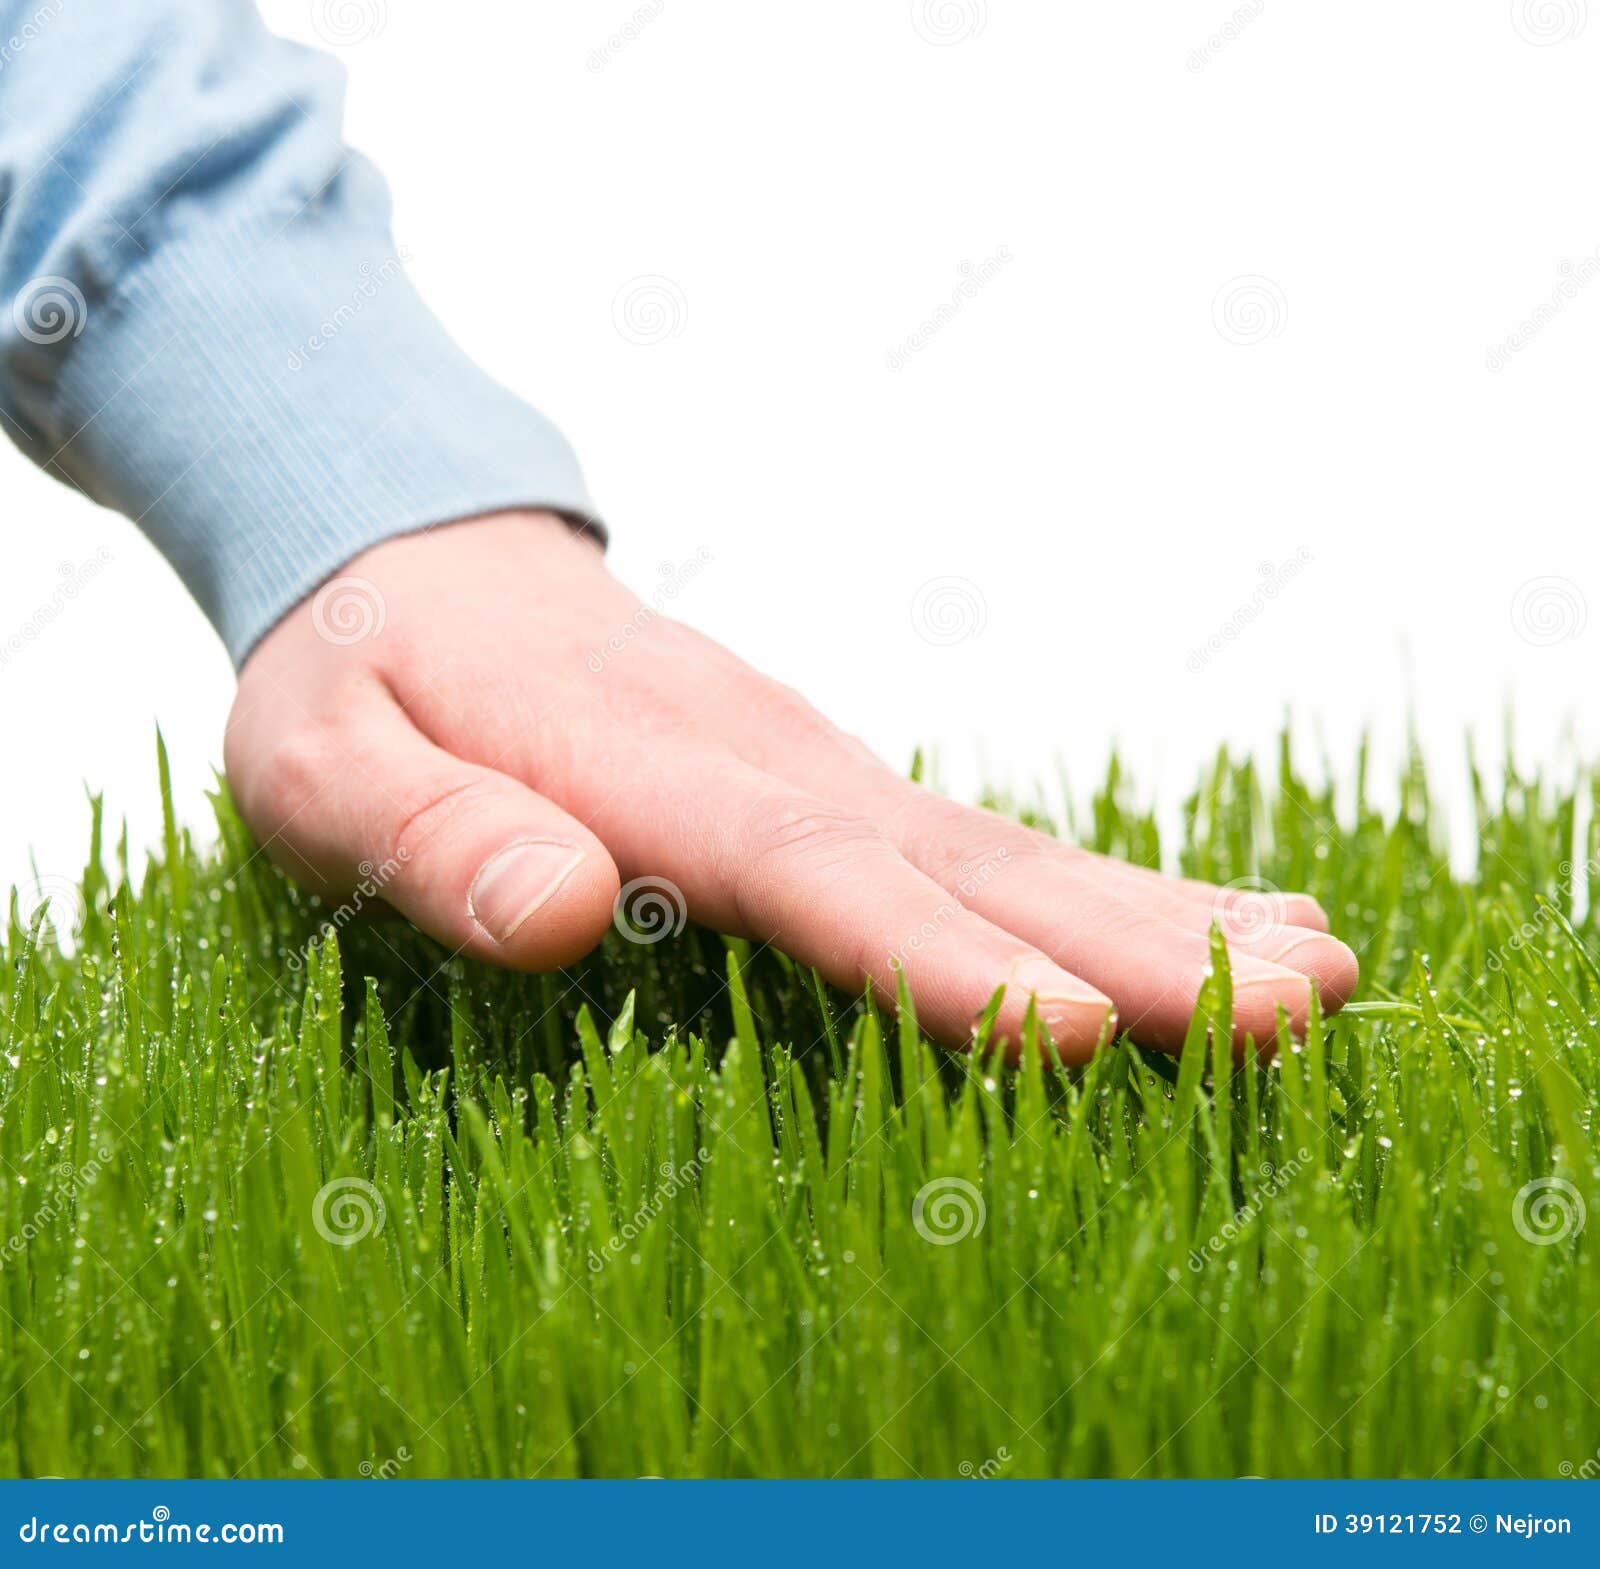 Grass touch What's the